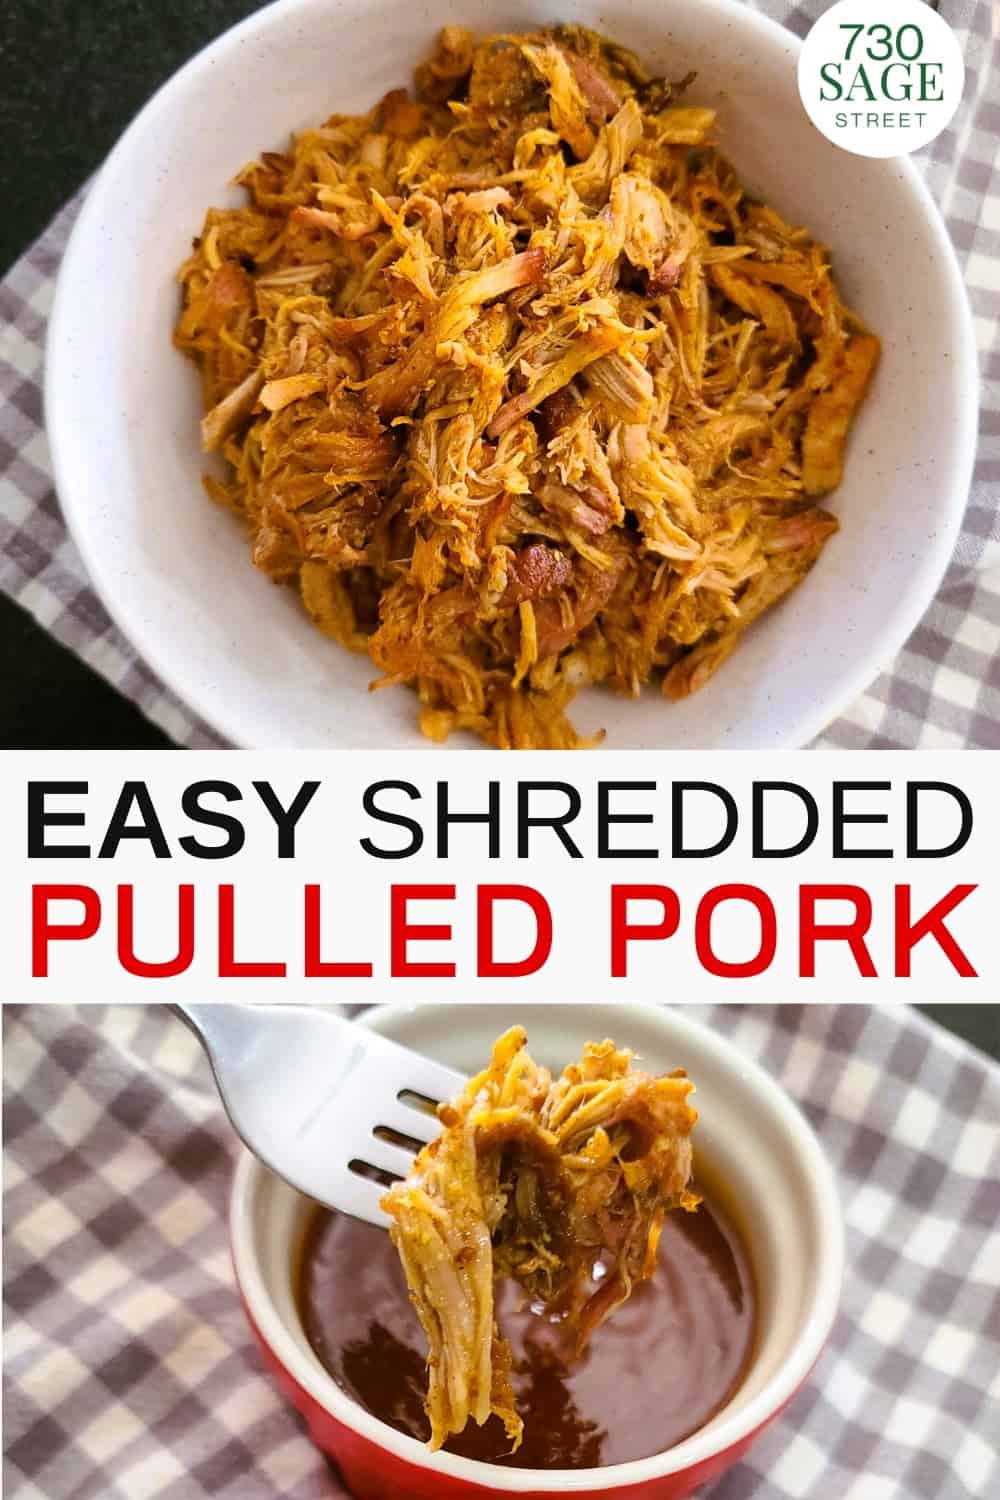 Easy Oven-Cooked Pulled Pork with 